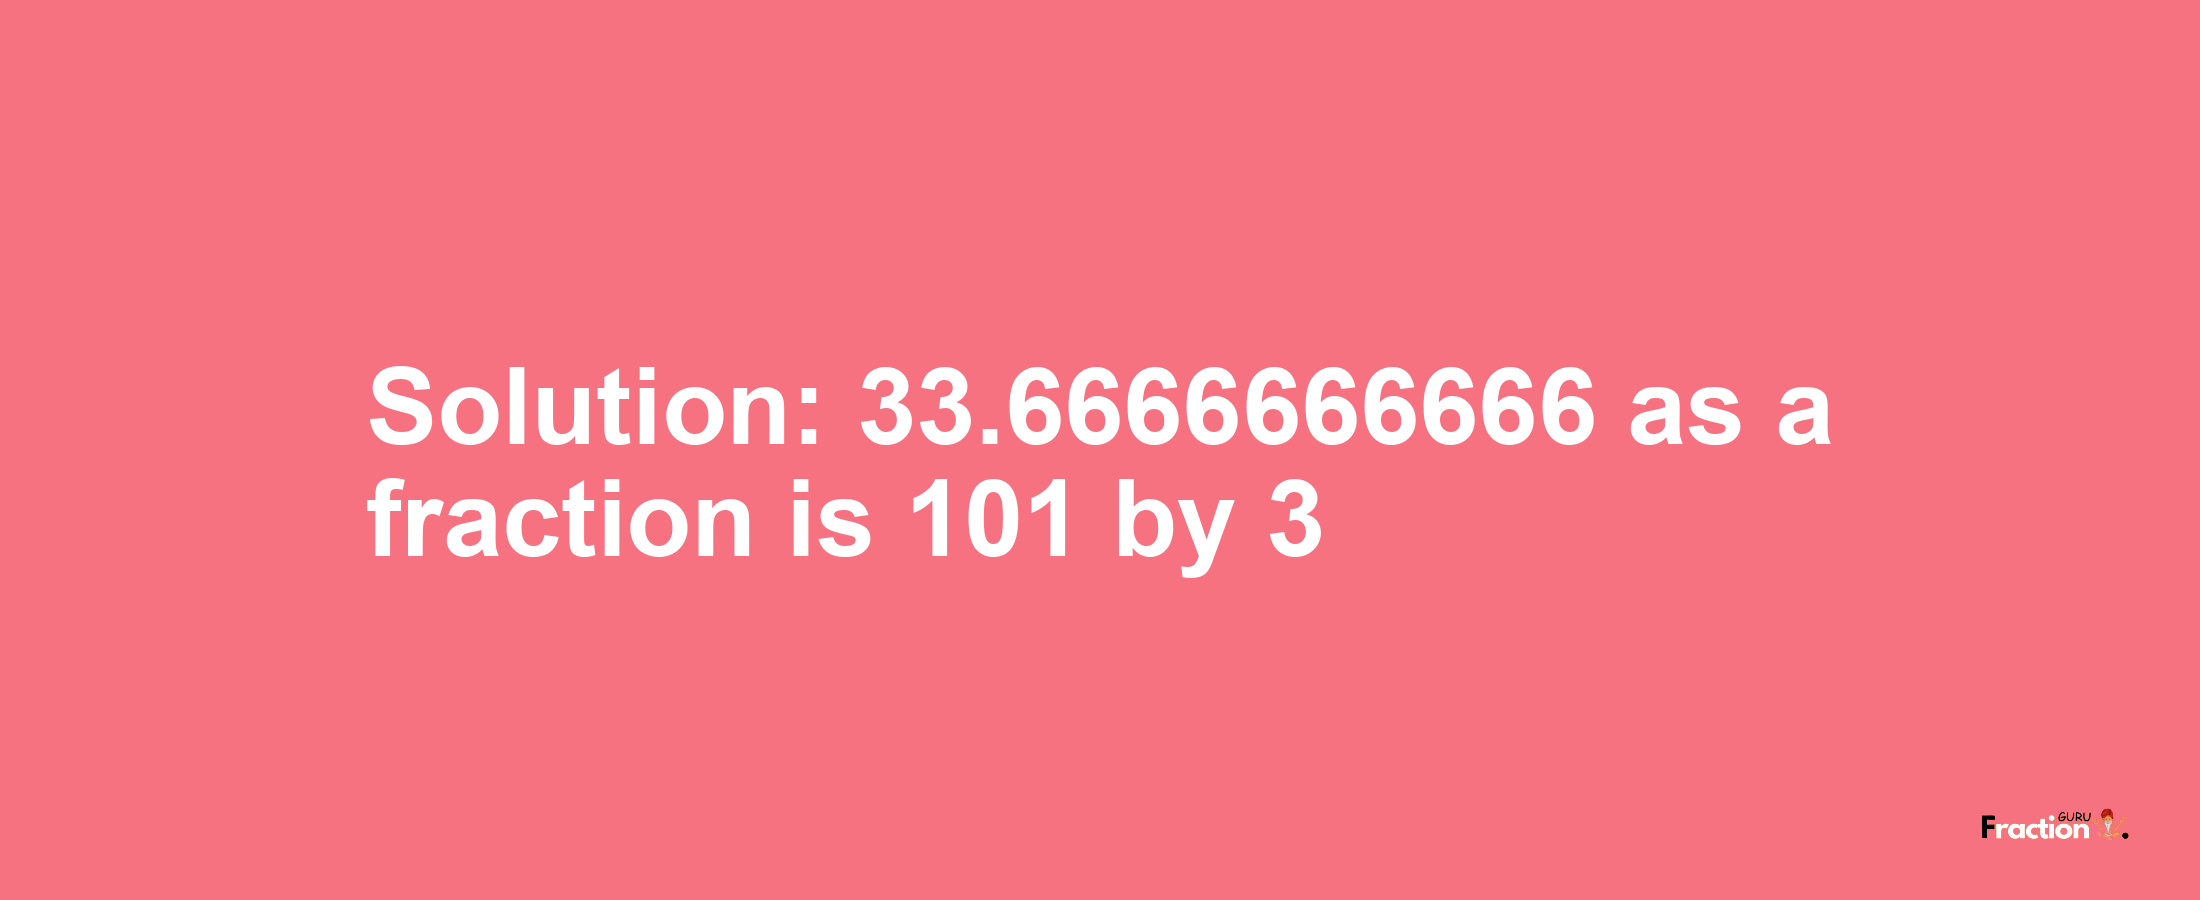 Solution:33.6666666666 as a fraction is 101/3